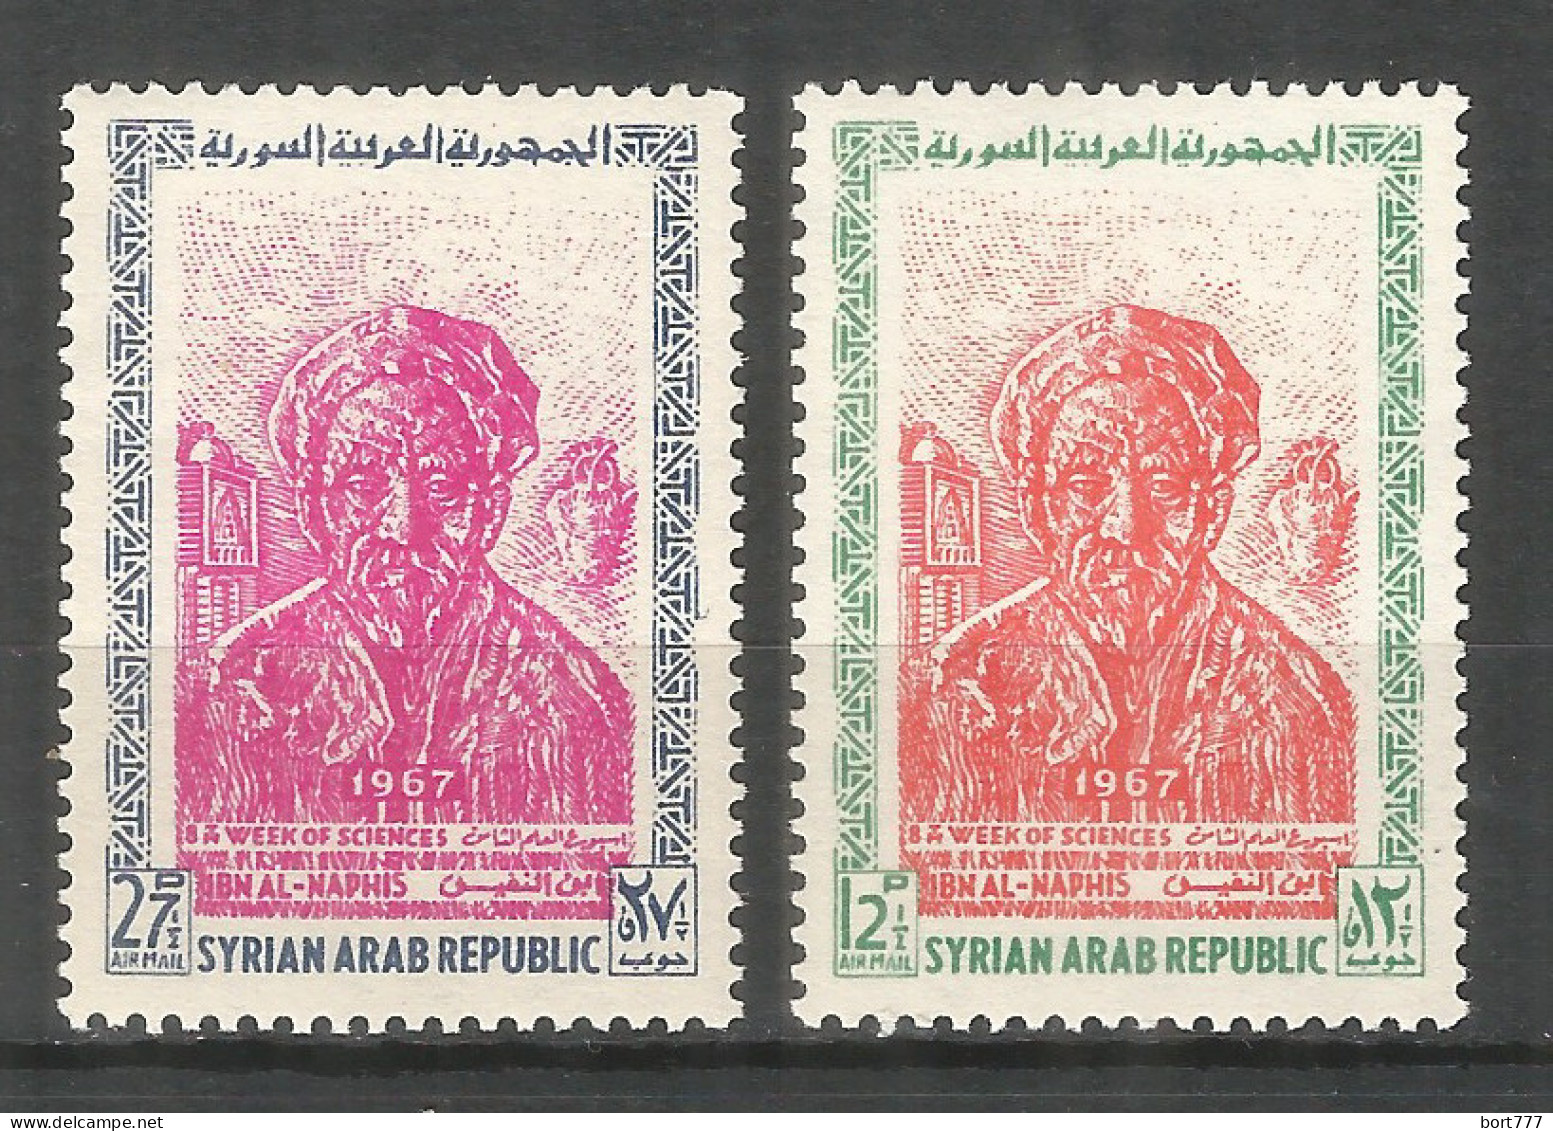 Syria 1966 Mint Stamps MNH(**)  - Syrien